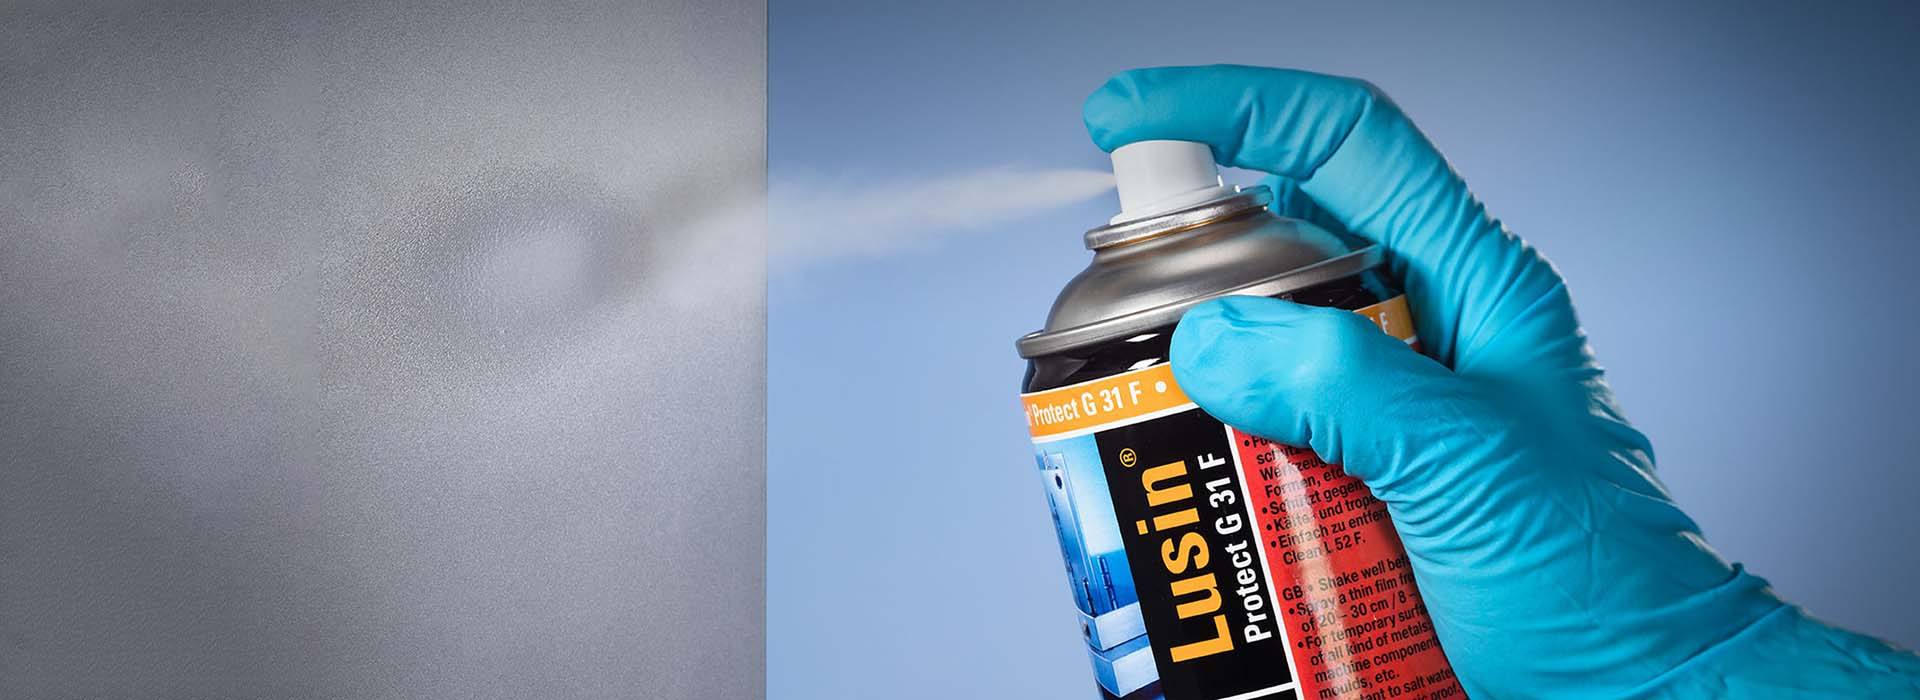 Lusin® Protect G31F Mould Protectant (Anti-corrosion) | Lusin® Protect G31F Formen-Schutzmittel (Korrosionsschutz)